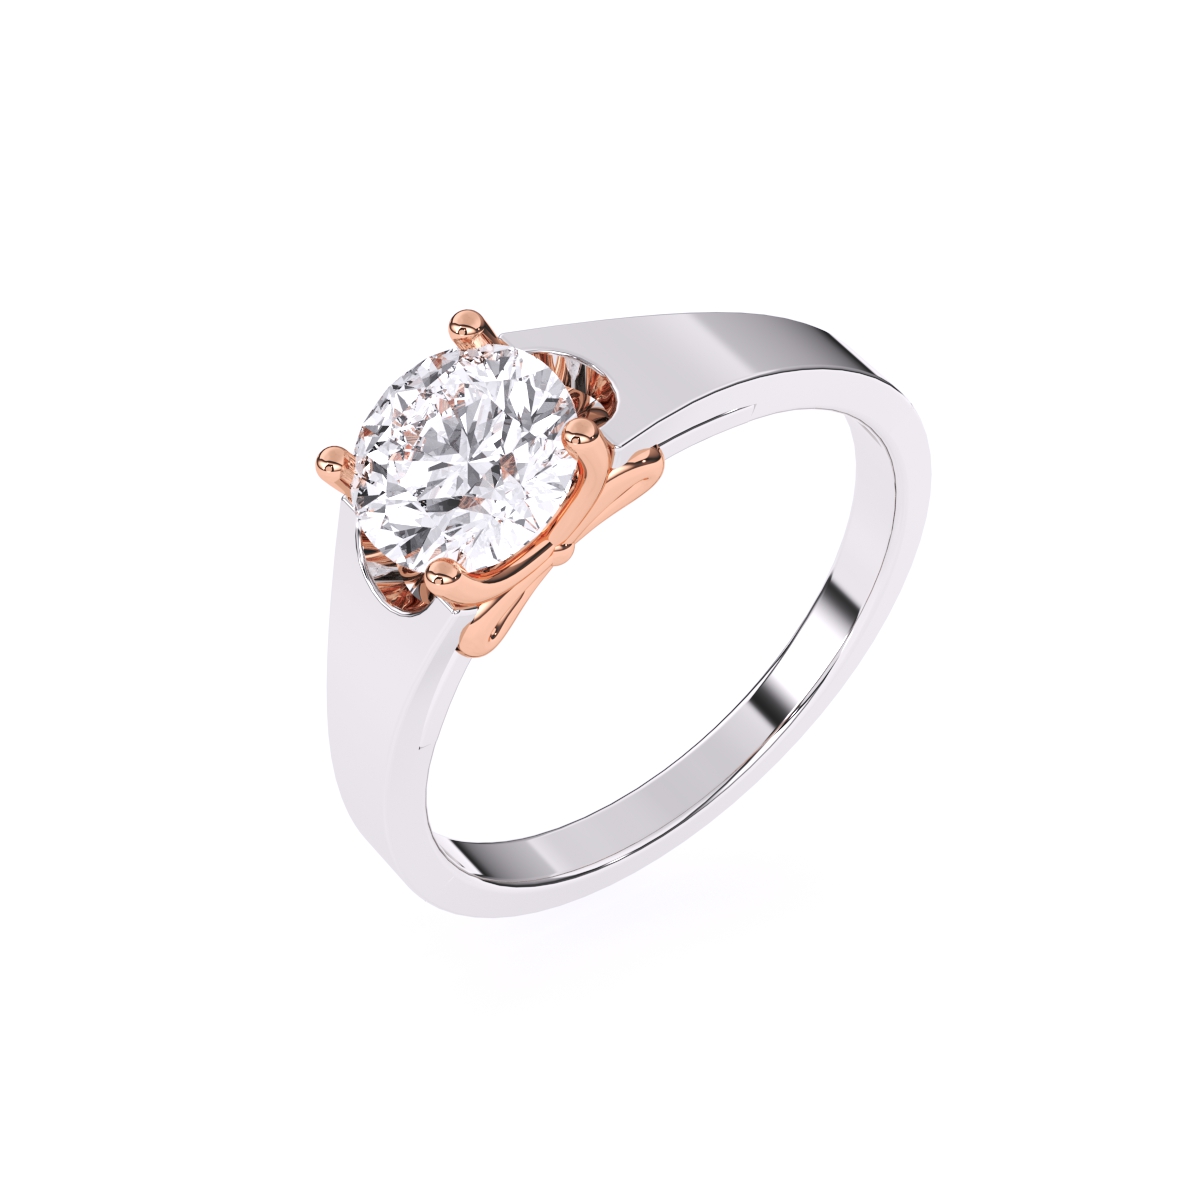 White Gold Engagement ring with Center Cushion cut Diamond, Eng-50000